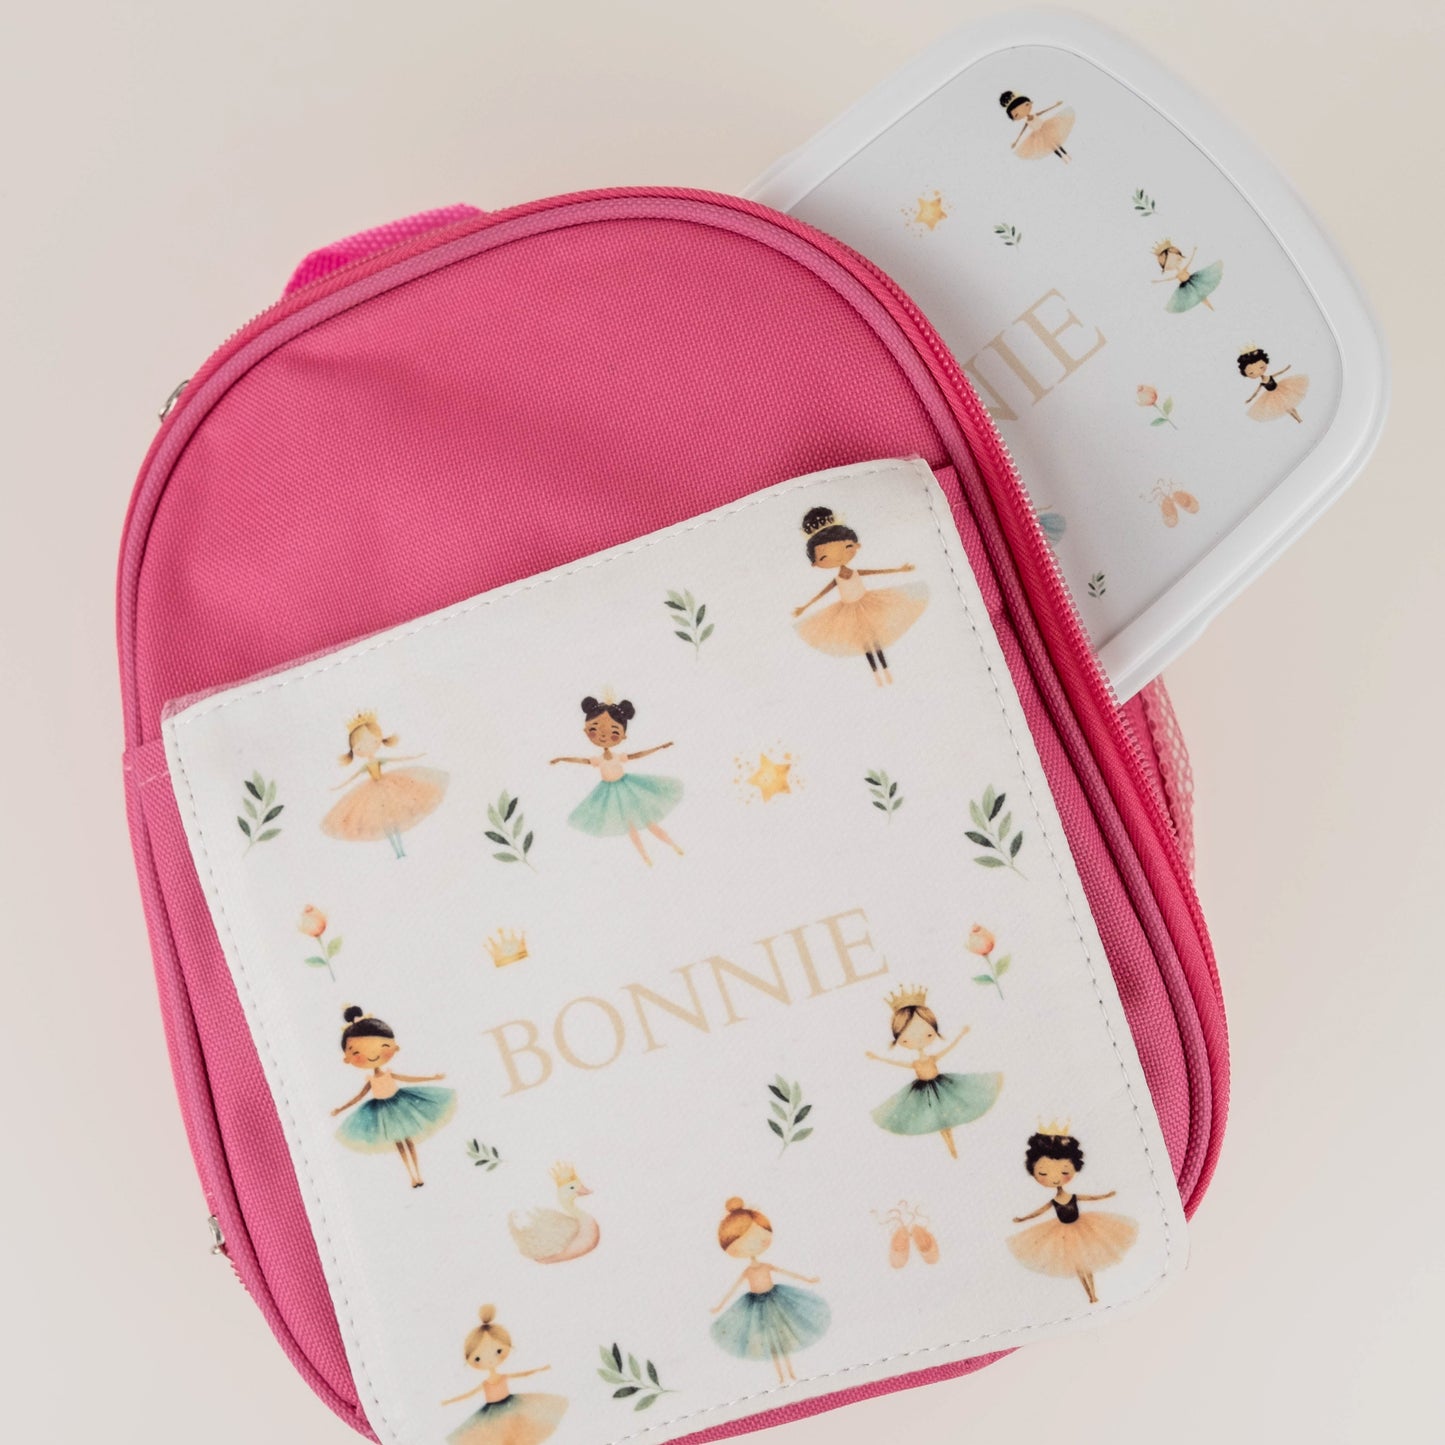 Children’s Personalised Lunch Bag and Box - Football Design